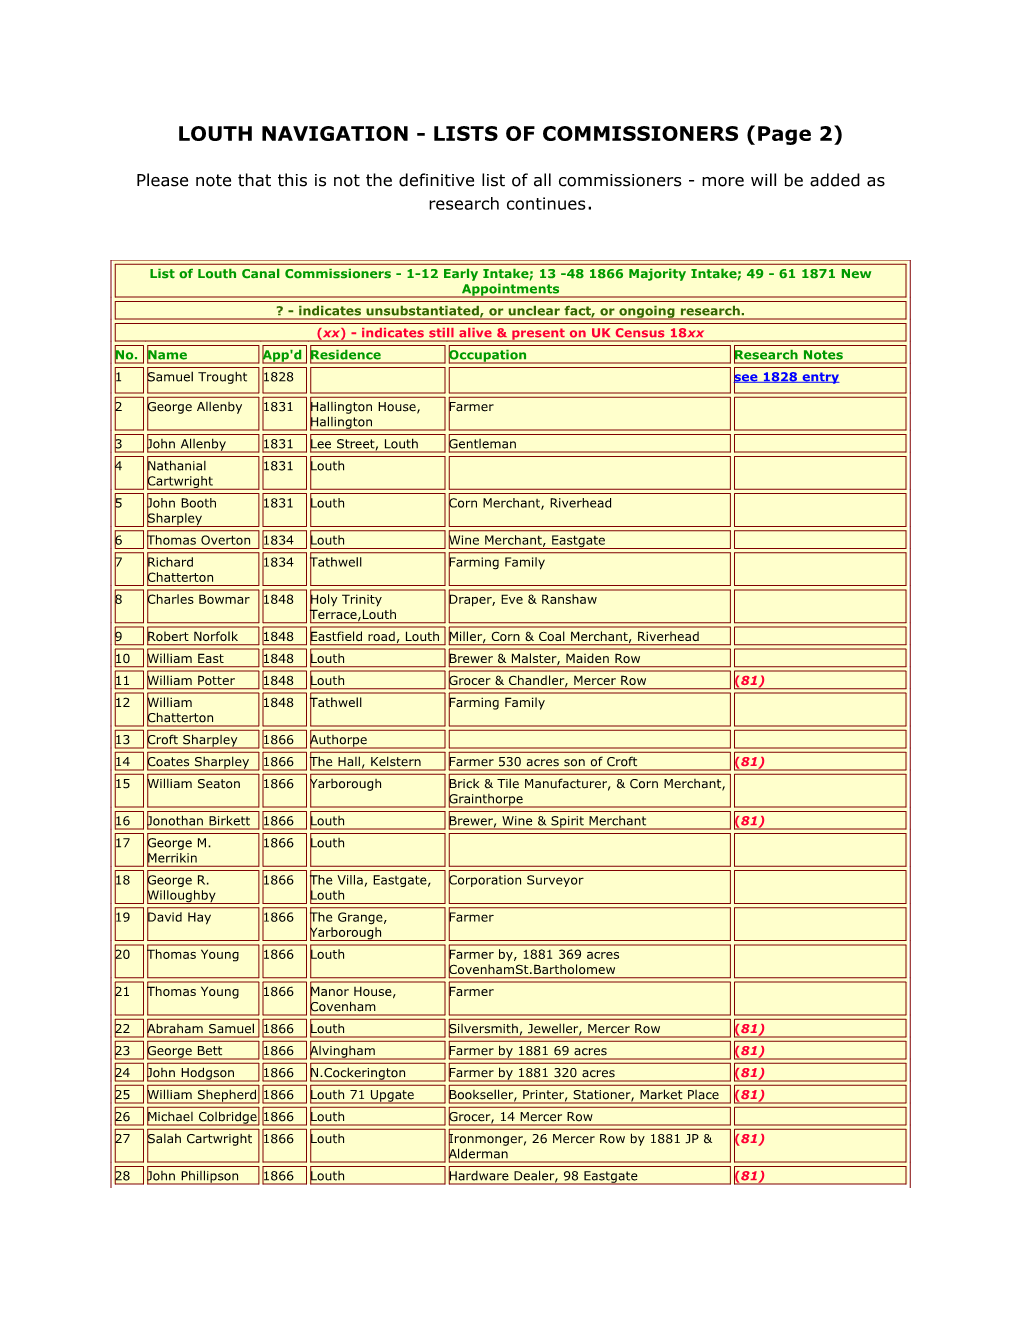 LOUTH NAVIGATION - LISTS of COMMISSIONERS (Page 2) Please Note That This Is Not the Definitive